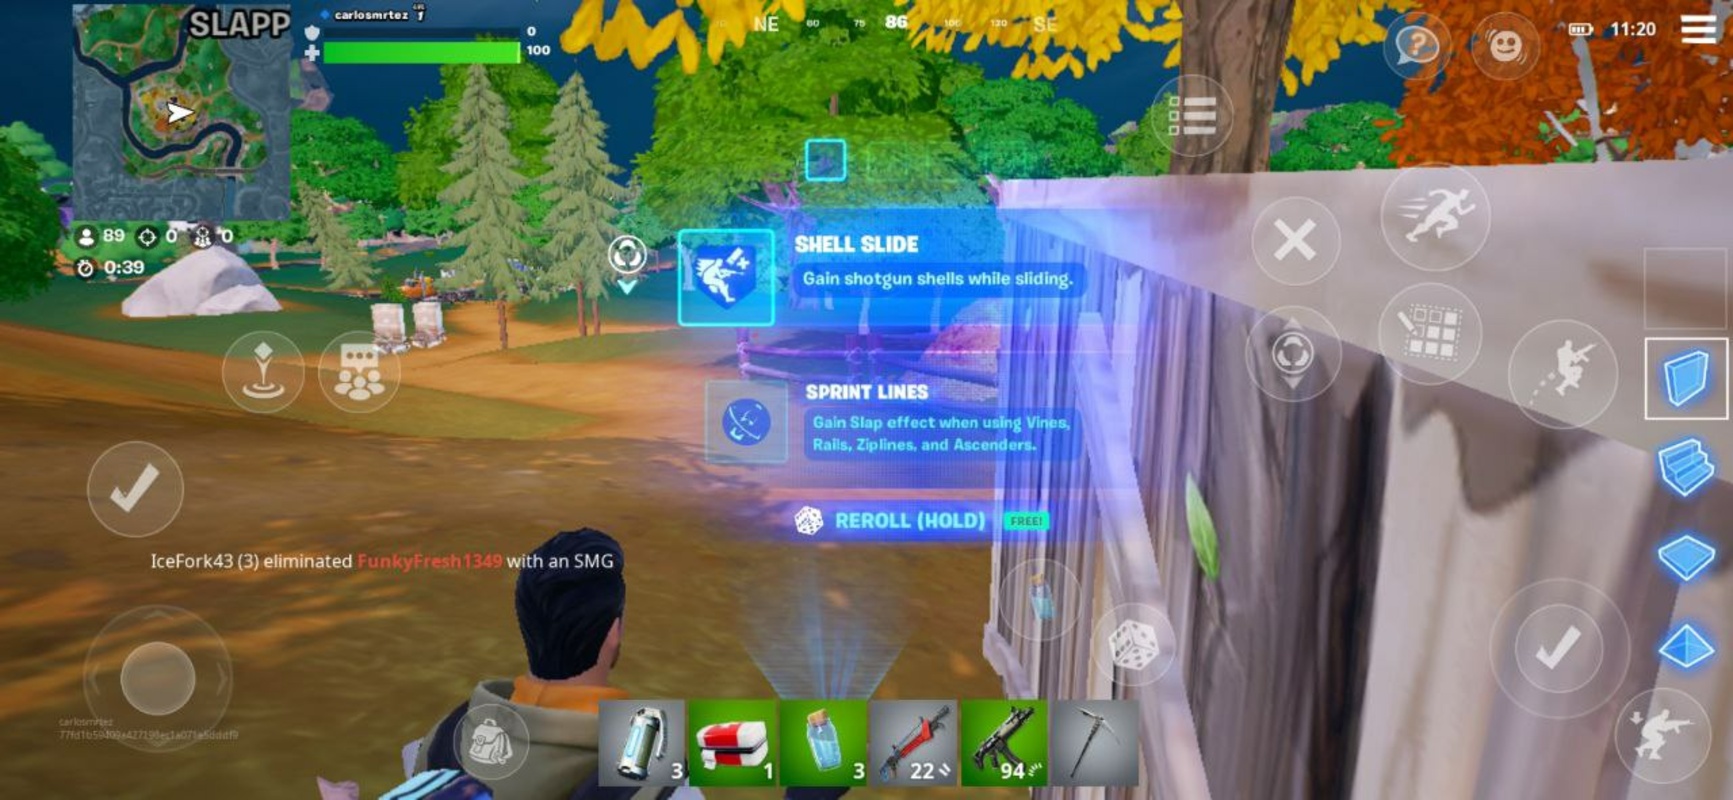 Fortnite 29.10.0-32391220-Android APK for Android Screenshot 8